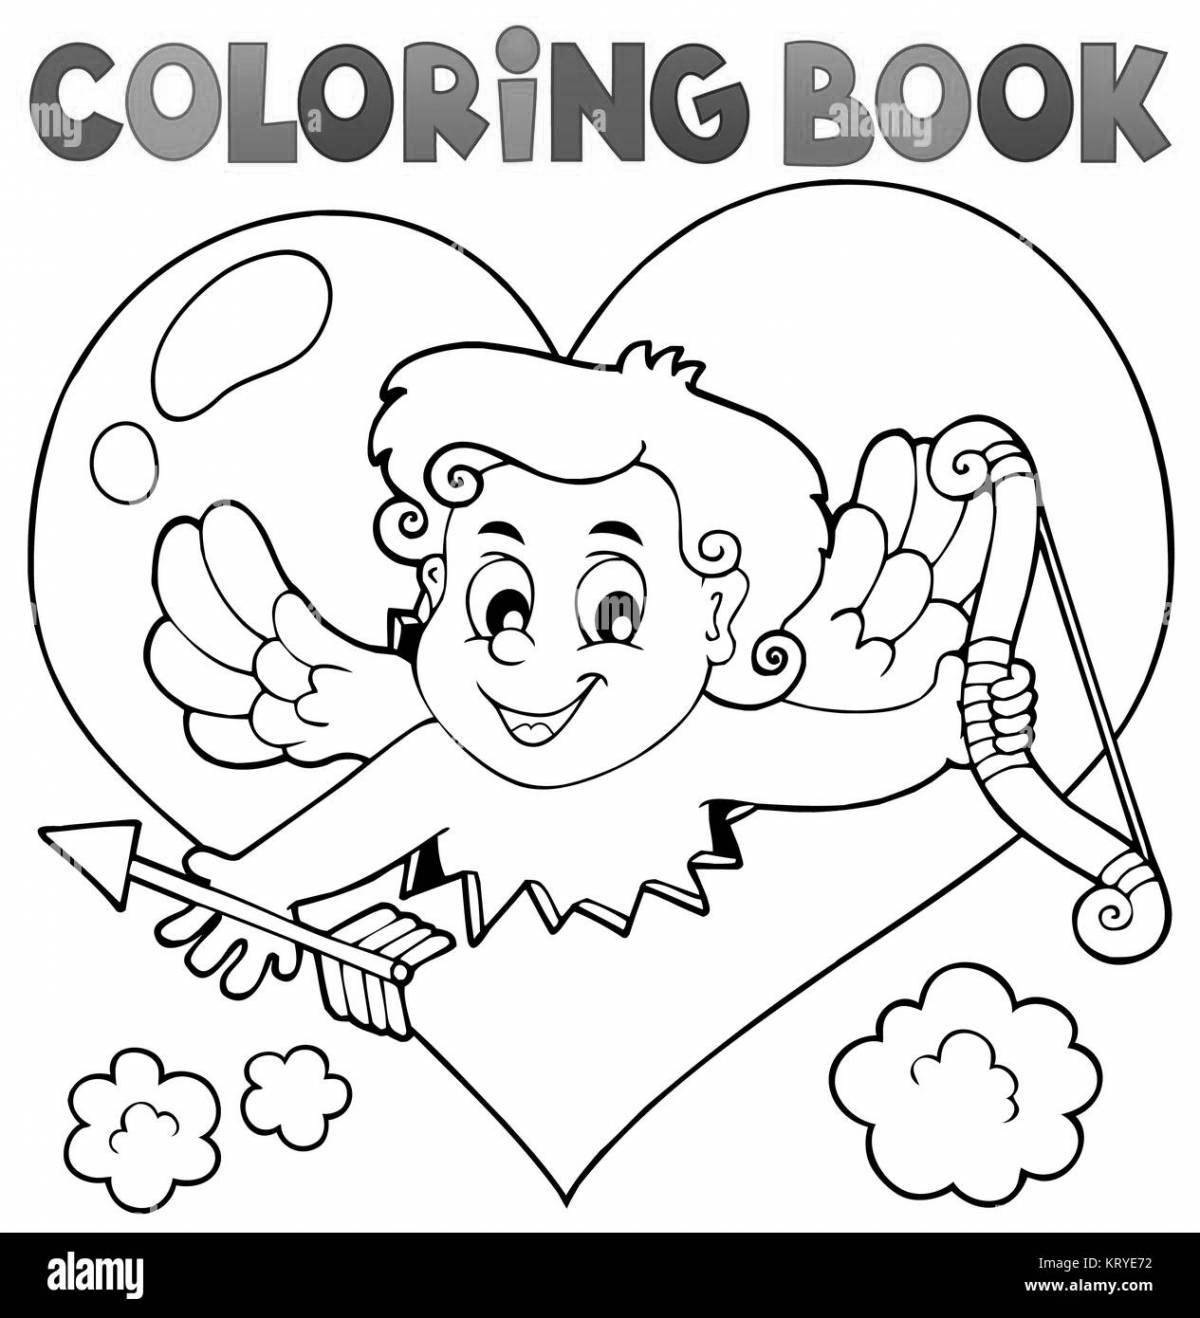 Coloring book sparkling cupid with heart